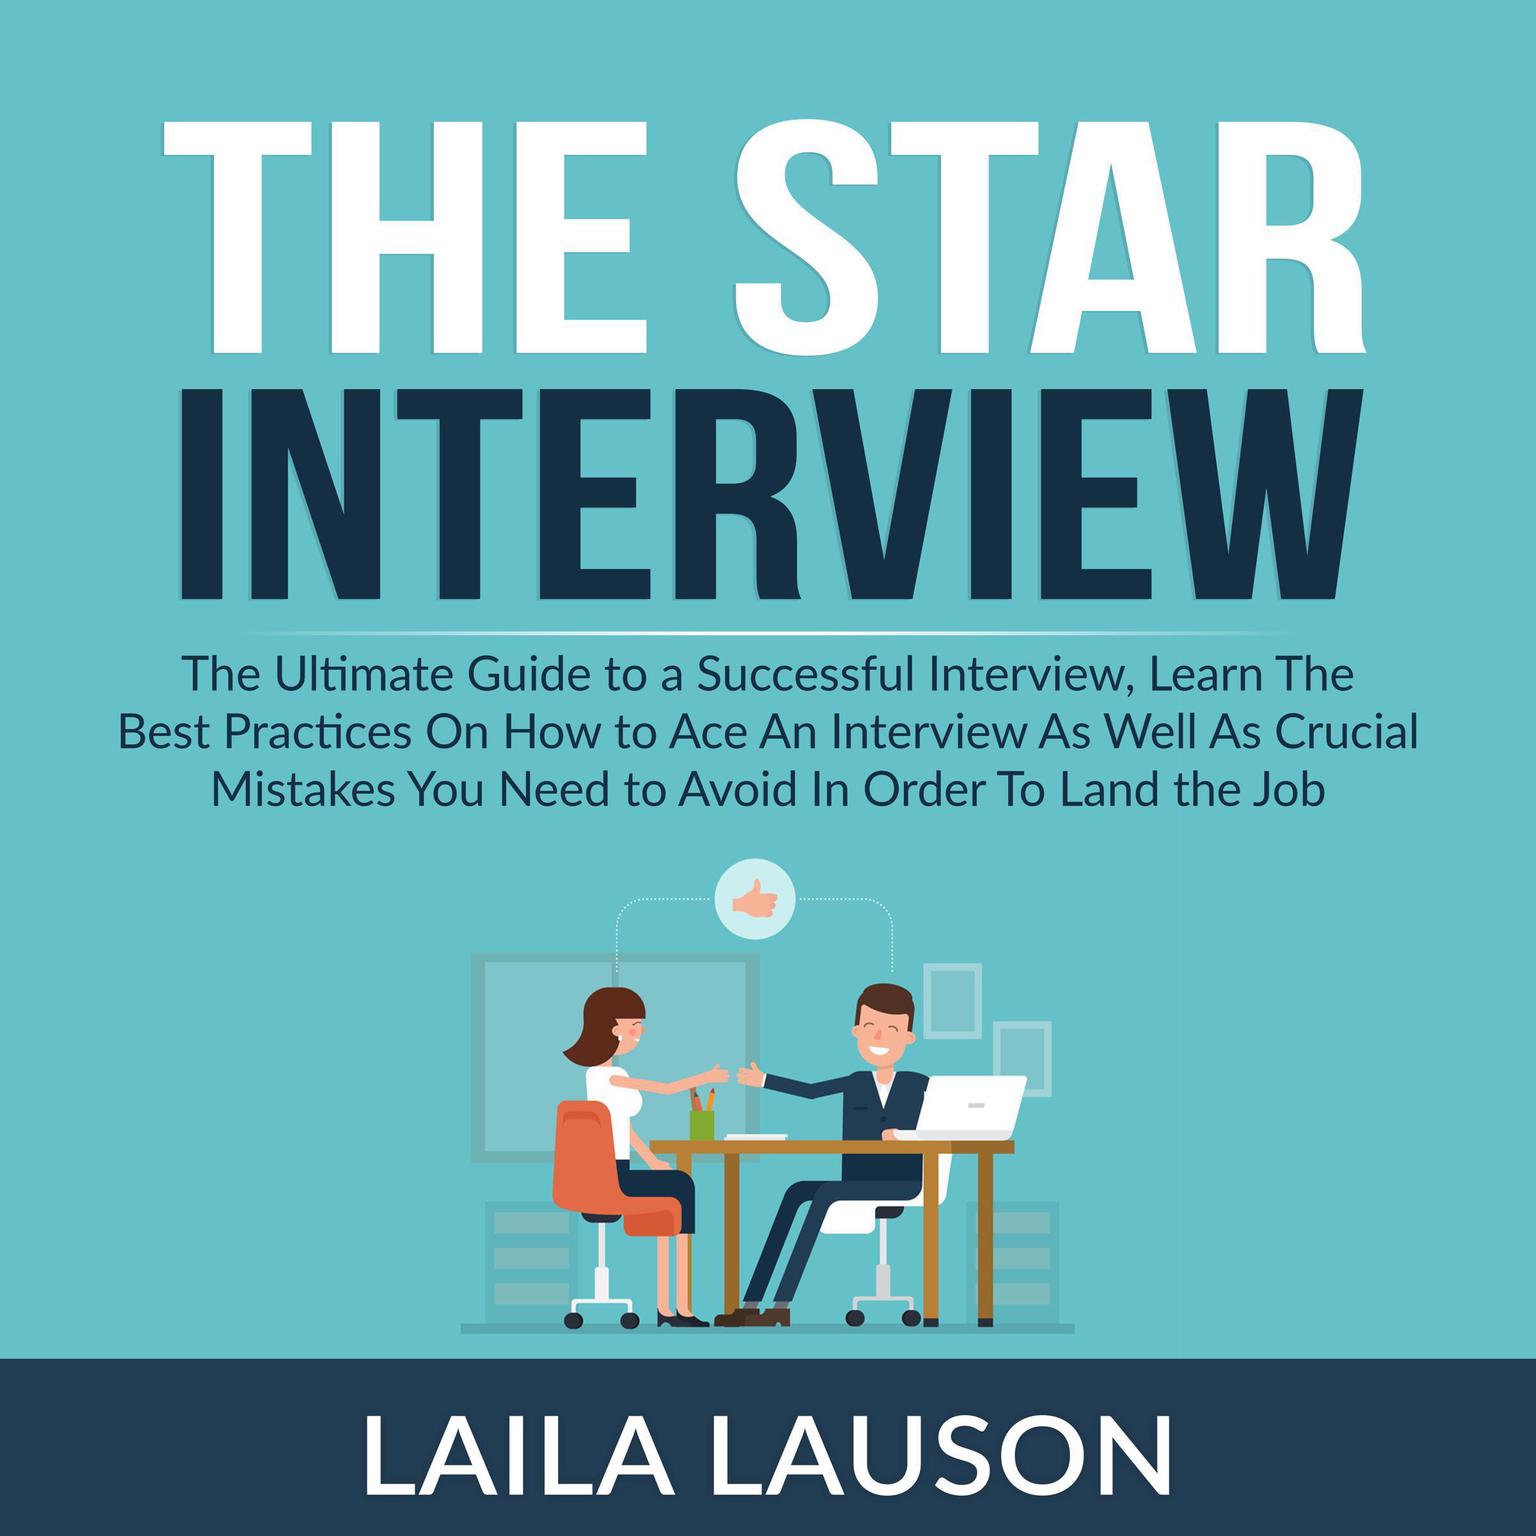 The Star Interview: The Ultimate Guide to a Successful Interview, Learn The Best Practices On How to Ace An Interview As Well As Crucial Mistakes You Need to Avoid In Order To Land the Job Audiobook, by Laila Lauson